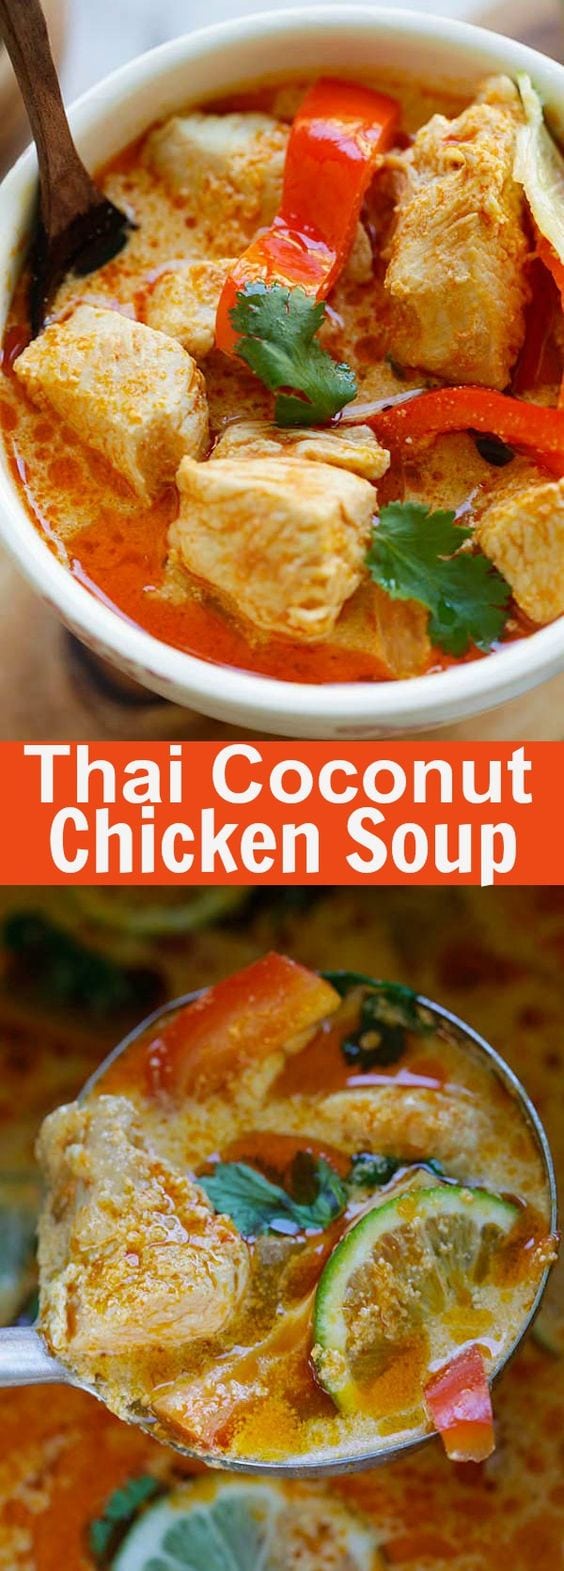 Creamy Thai Coconut Chicken Soup - easiest and fastest Thai coconut chicken recipe ever! Takes only 15 mins and dinner is ready | rasamalaysia.com